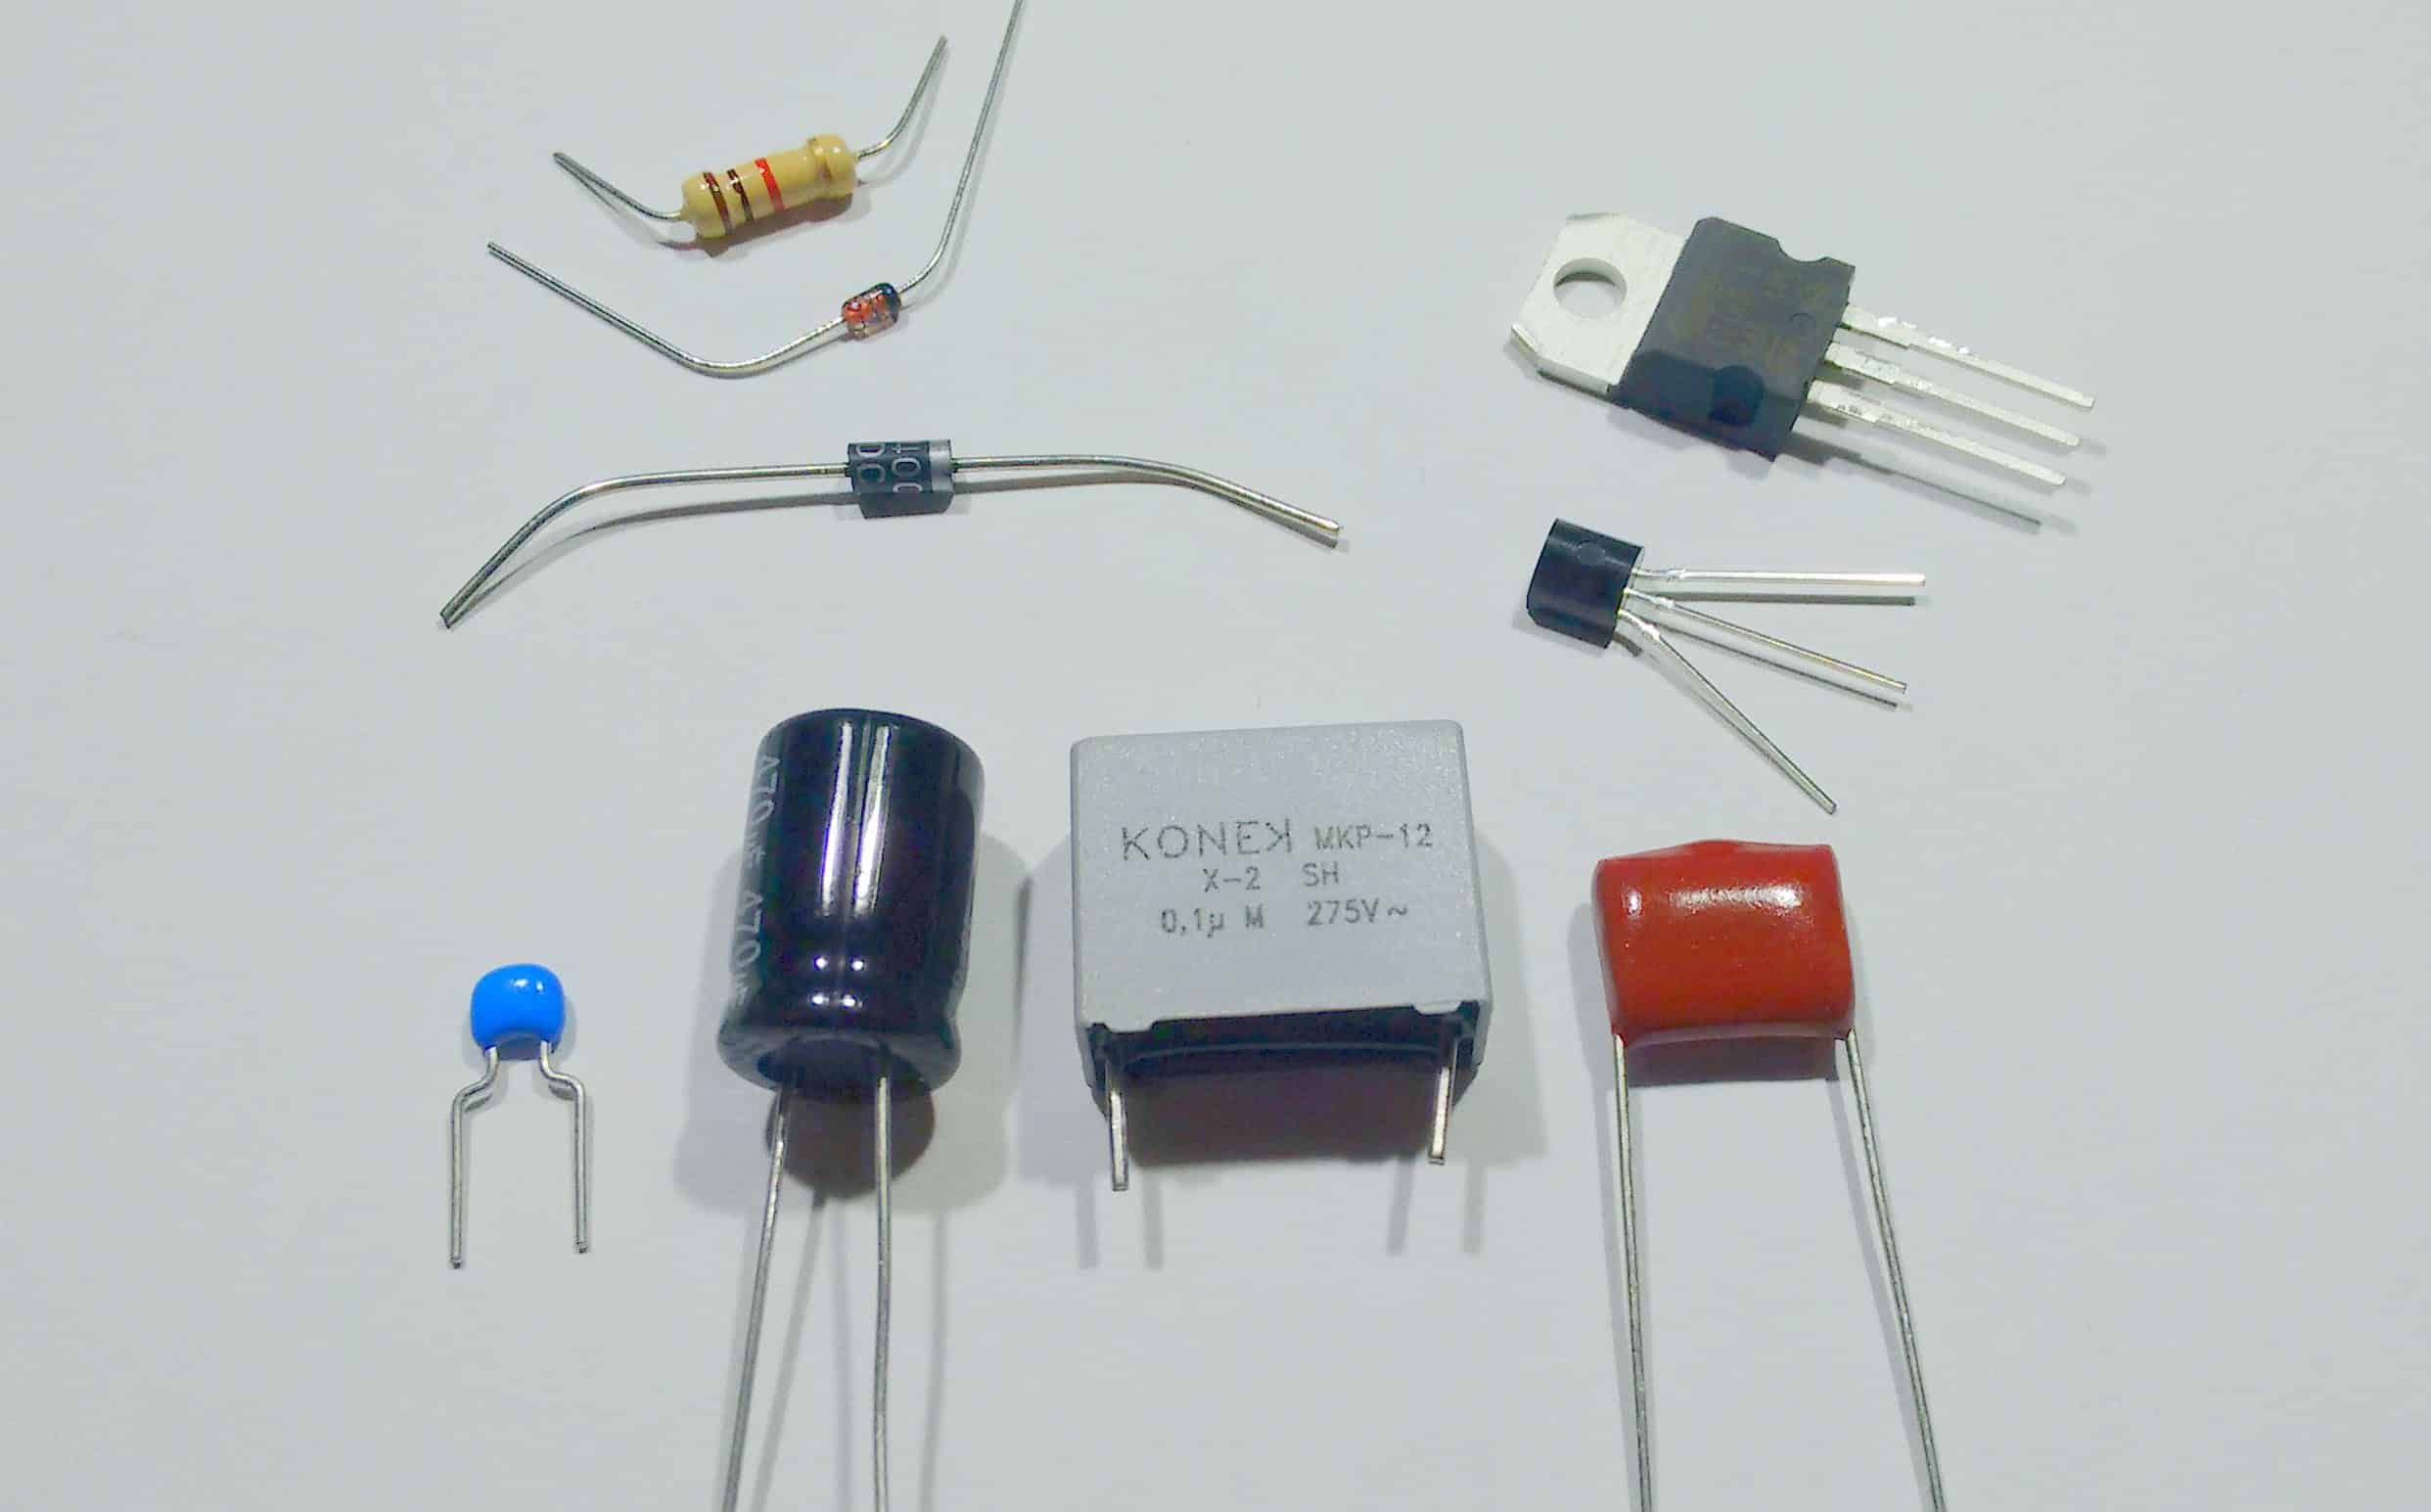 Overview of Basic Electronic Components | VIdeo Tutorial